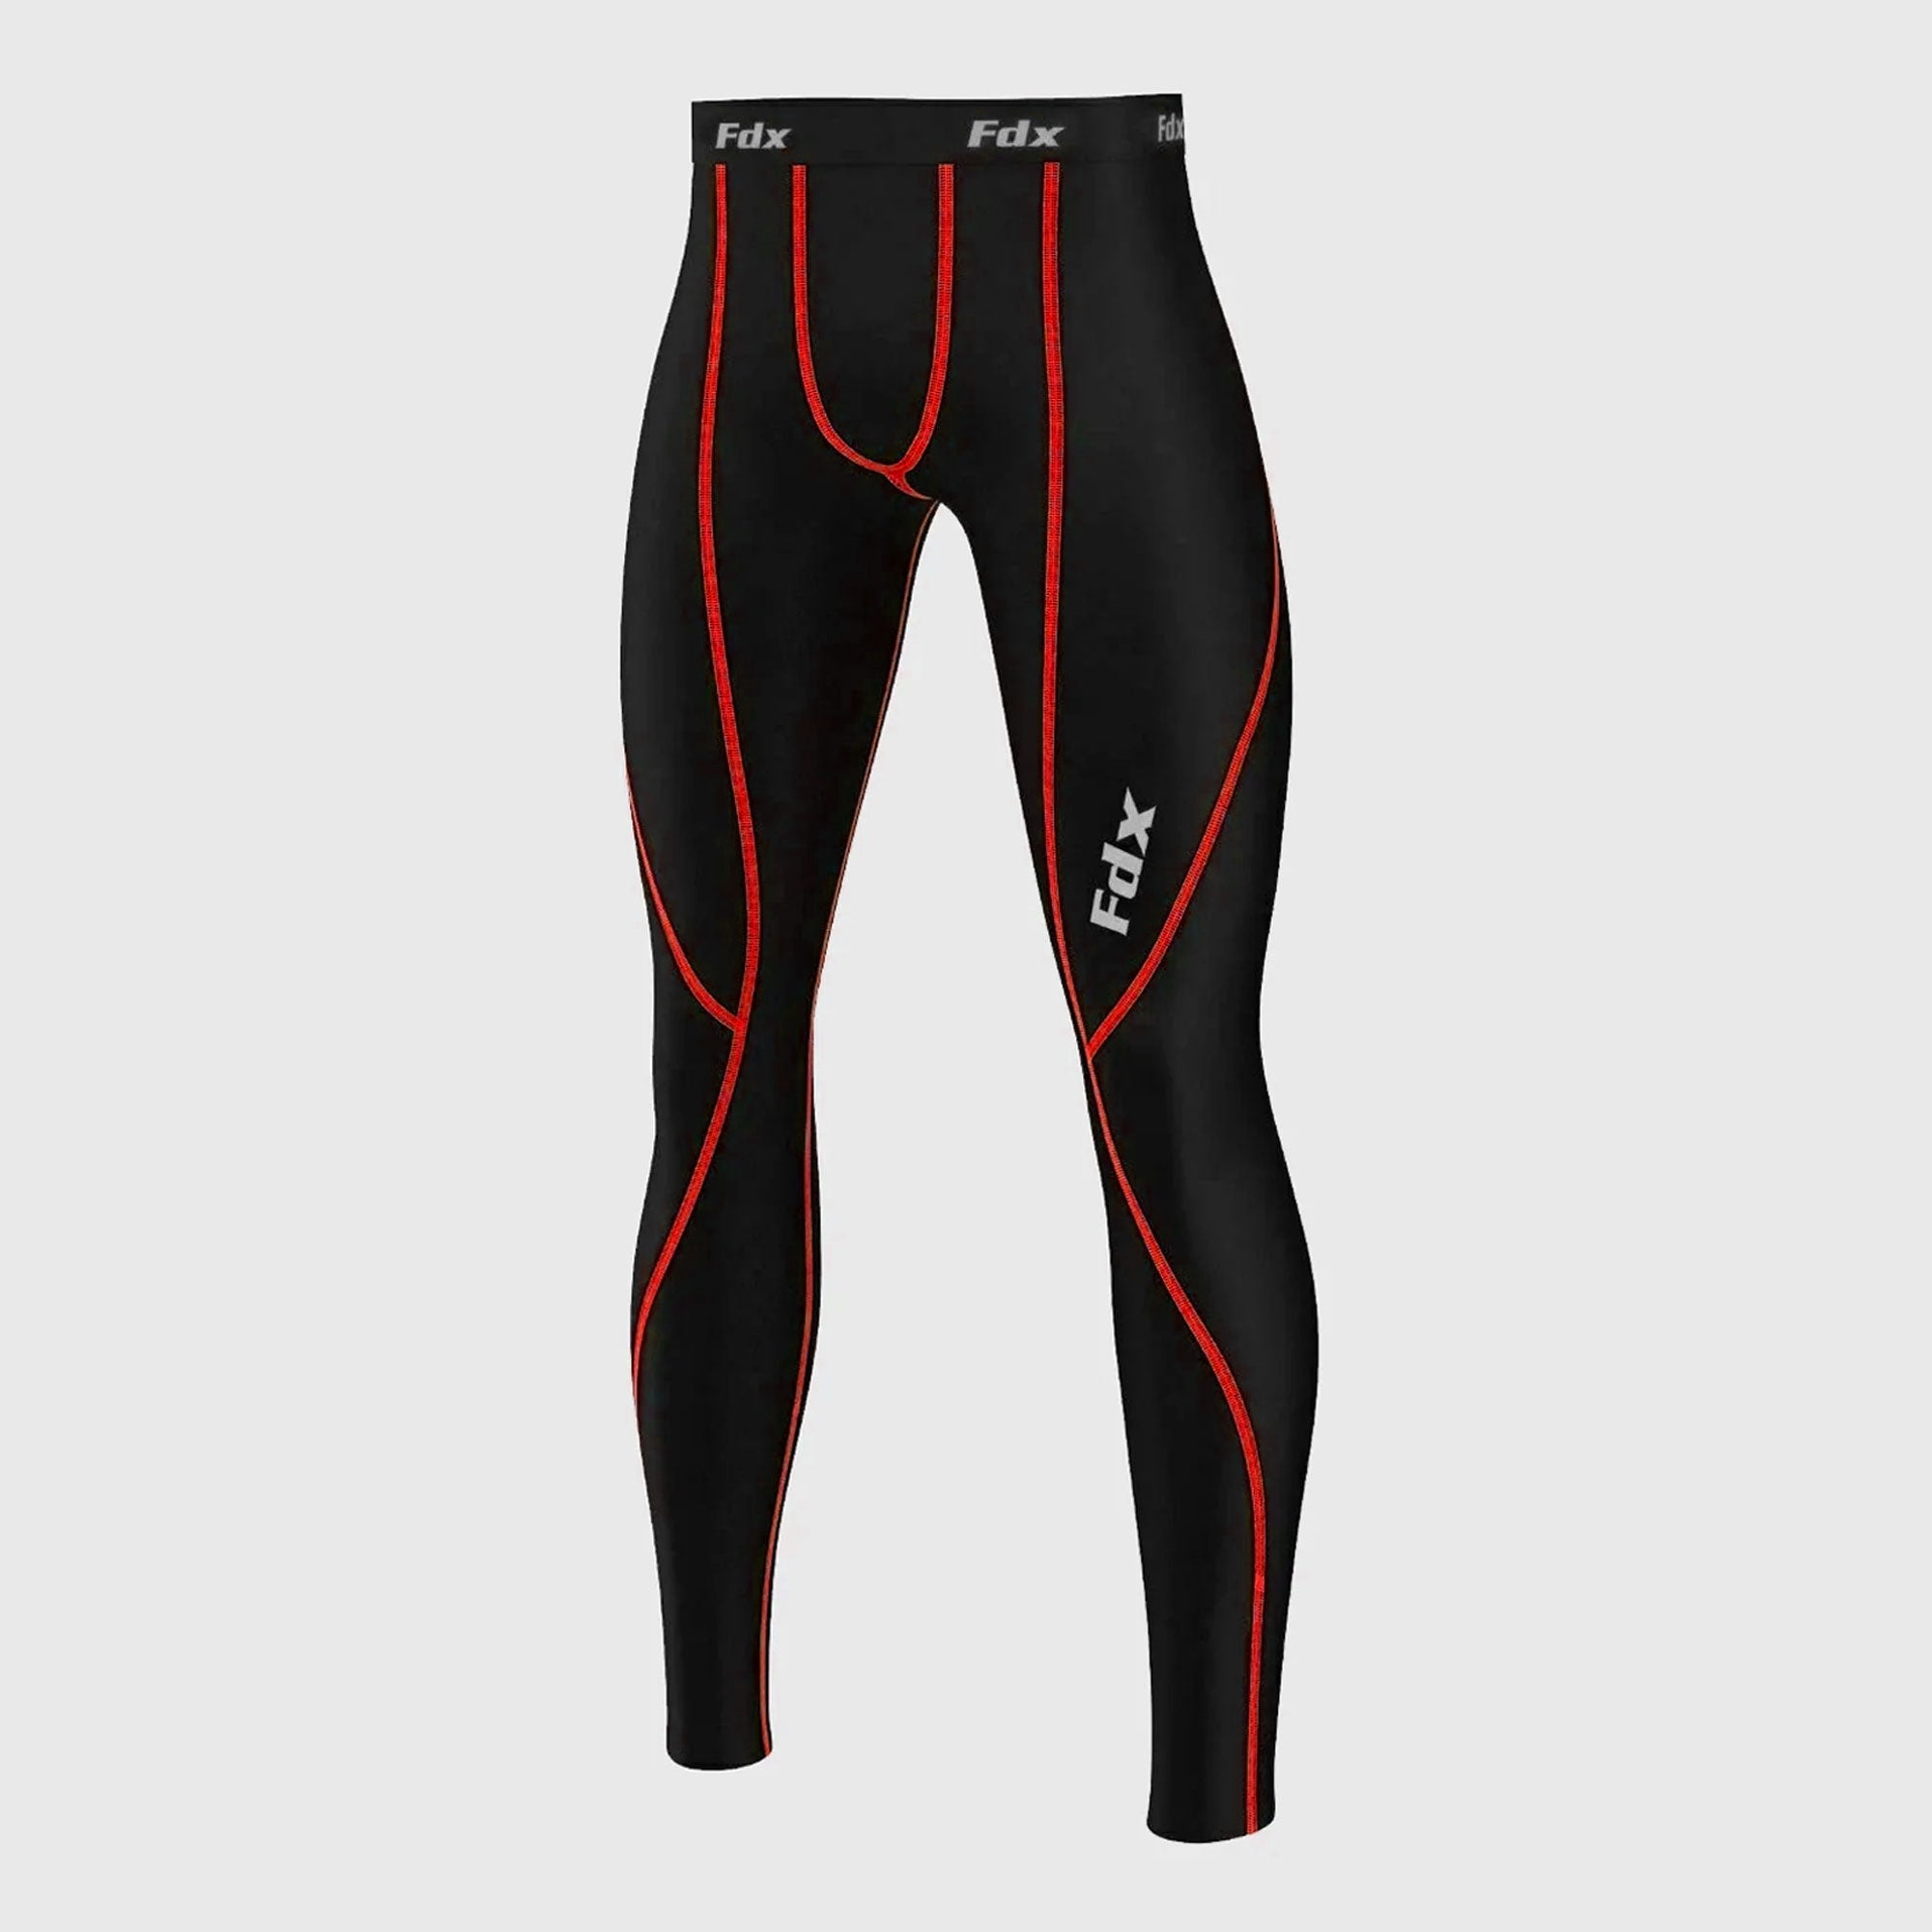 Fdx Thermolinx Red Men's Winter Compression Tights